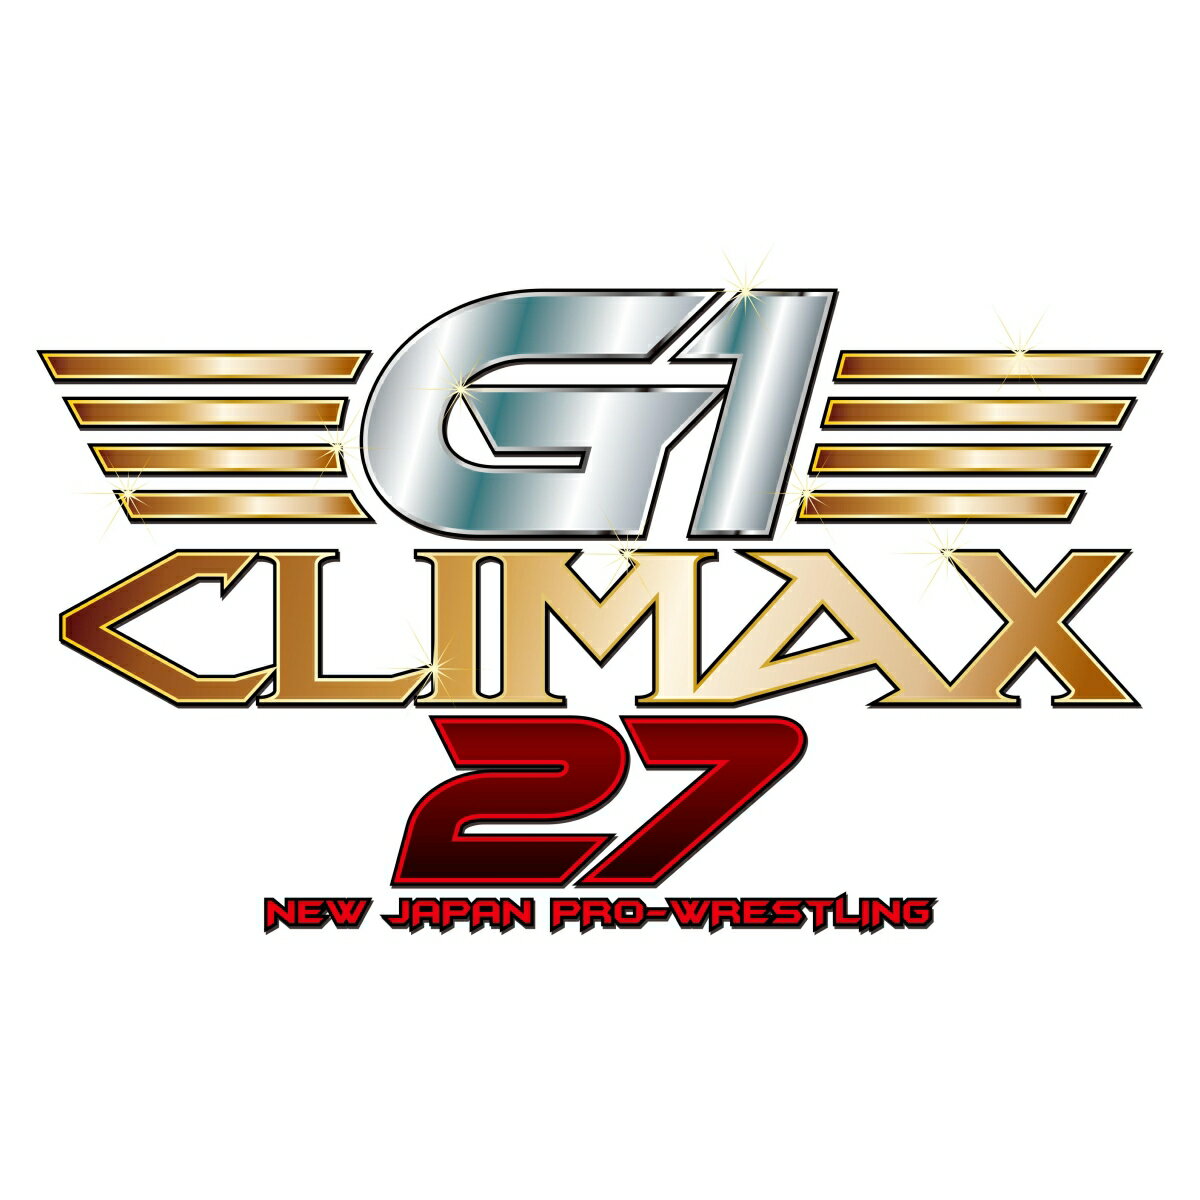 G1 CLIMAX 2017